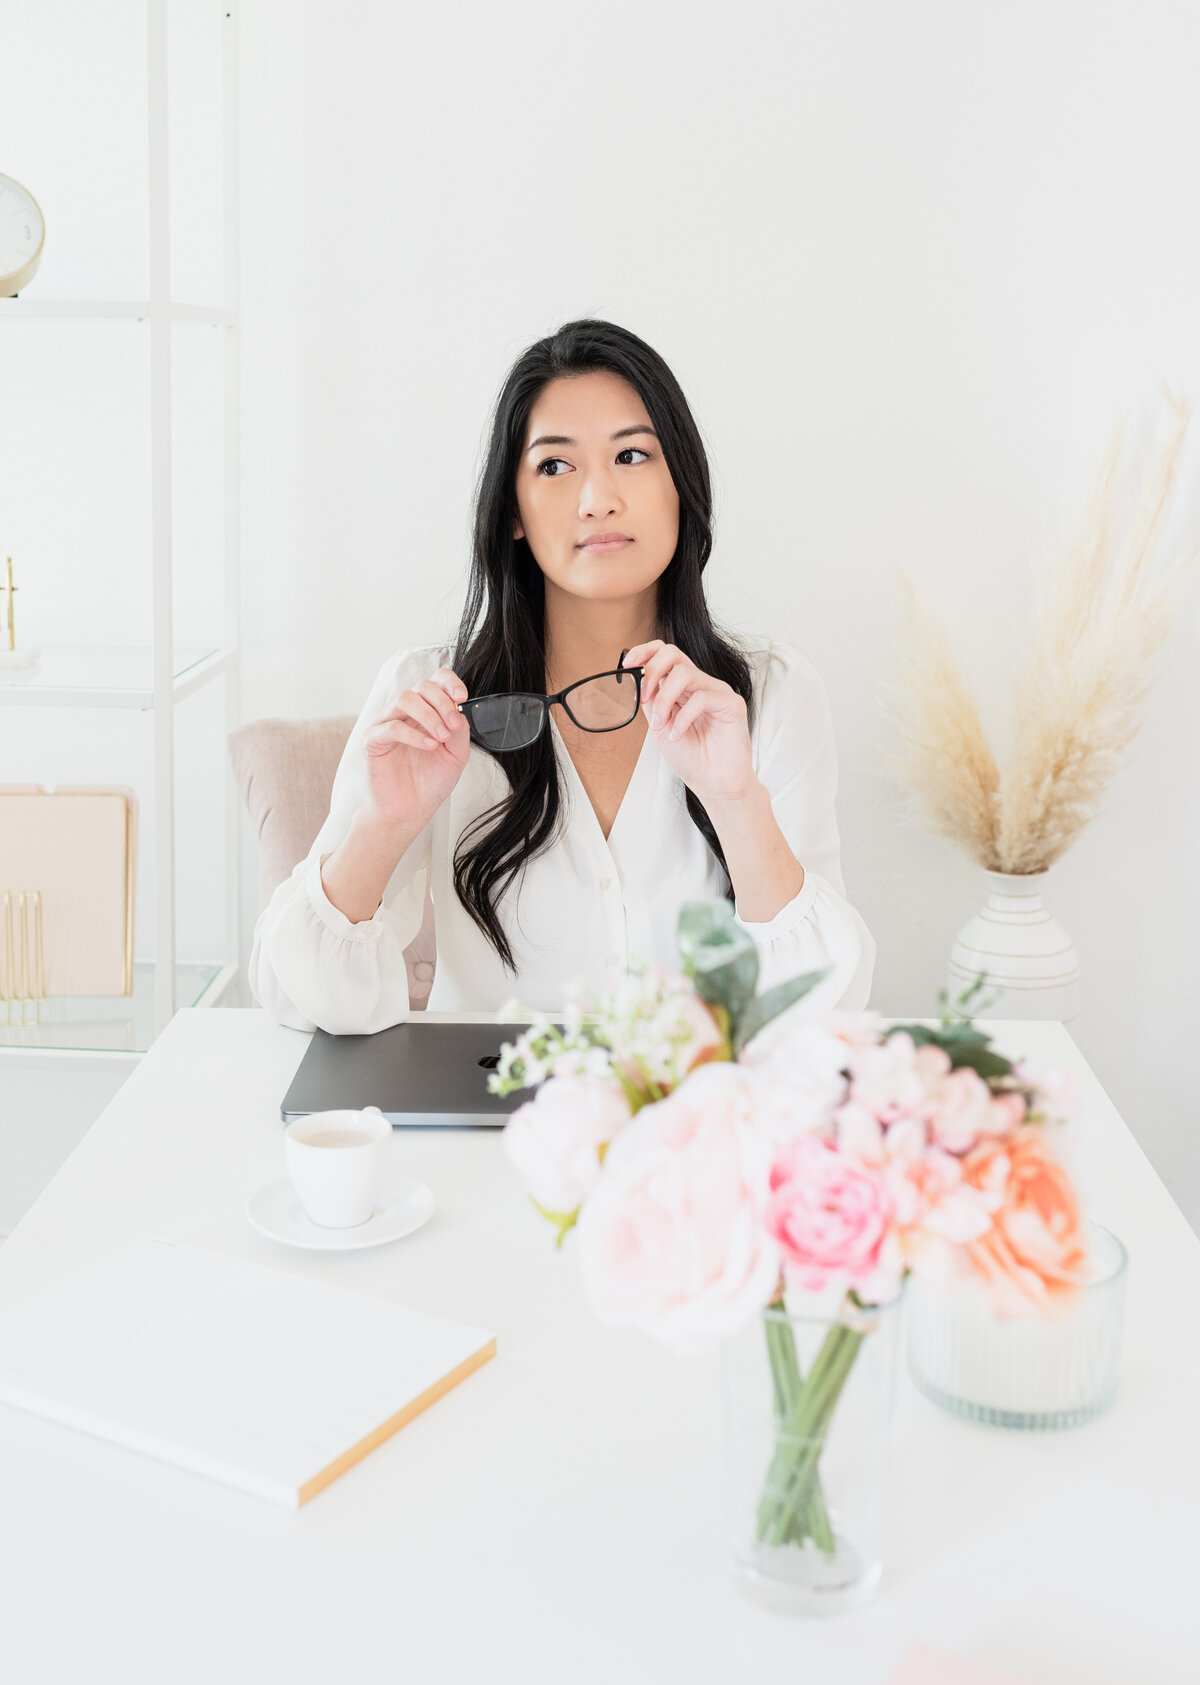 concerned entreprenuer Thinking at her desk with a bouquet of flowers in front of her